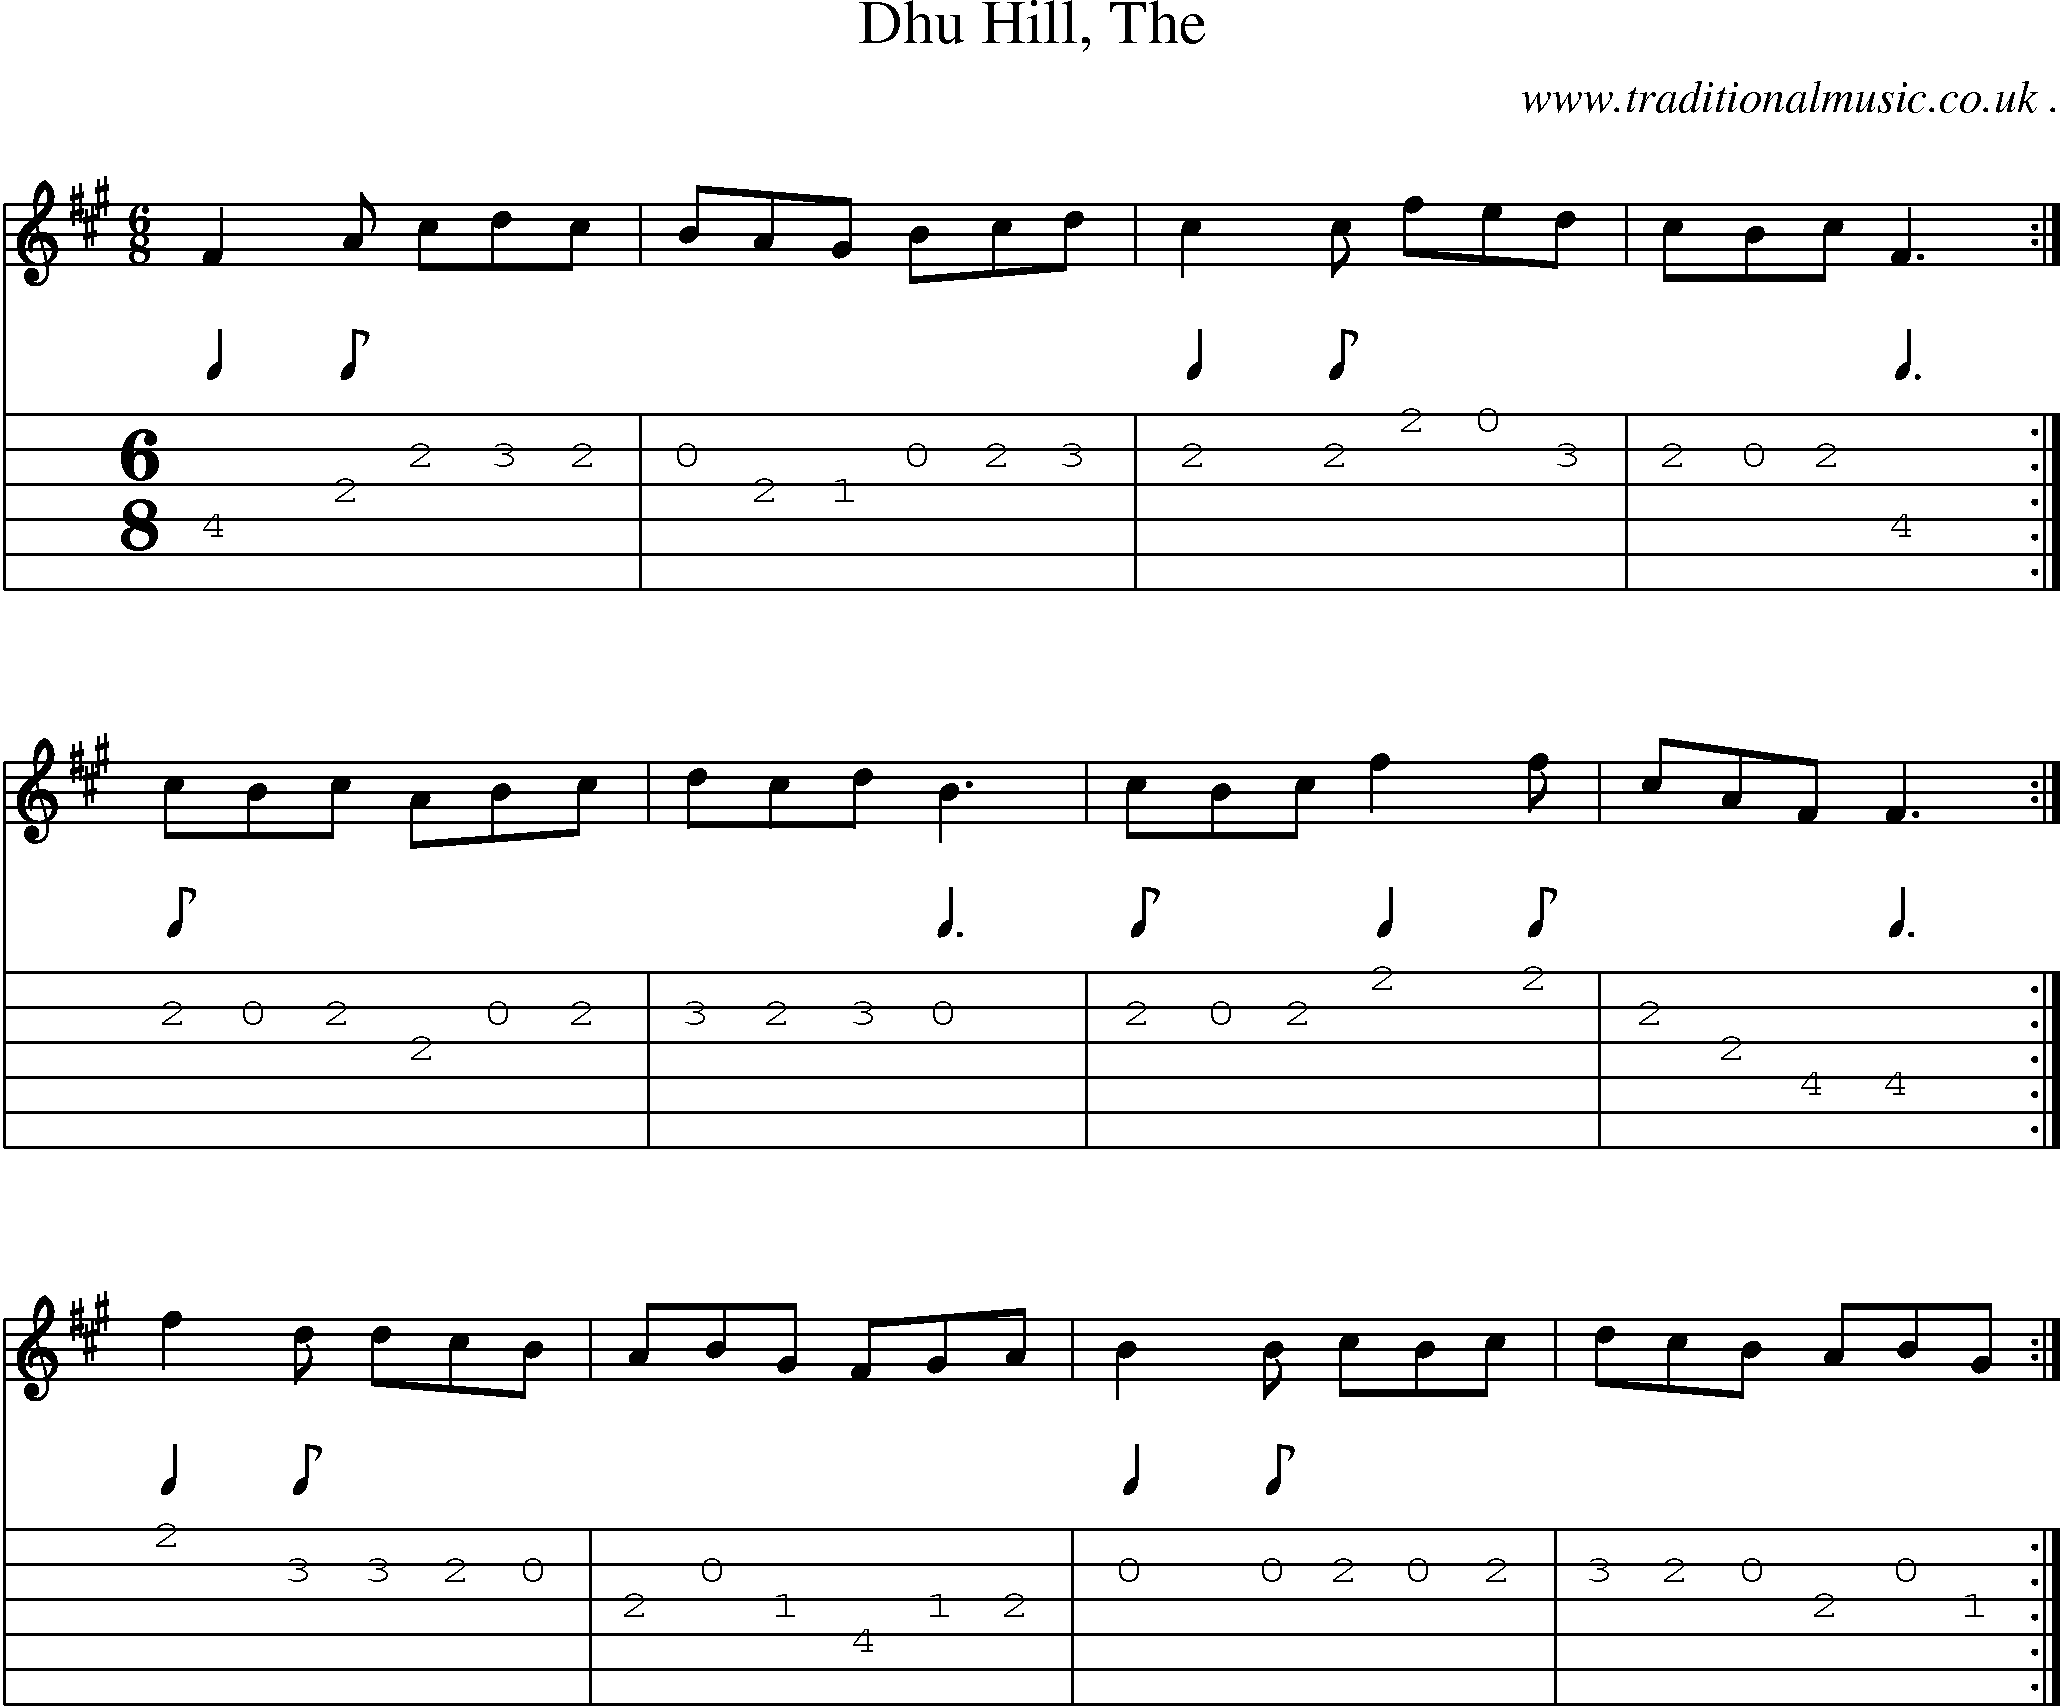 Sheet-music  score, Chords and Guitar Tabs for Dhu Hill The